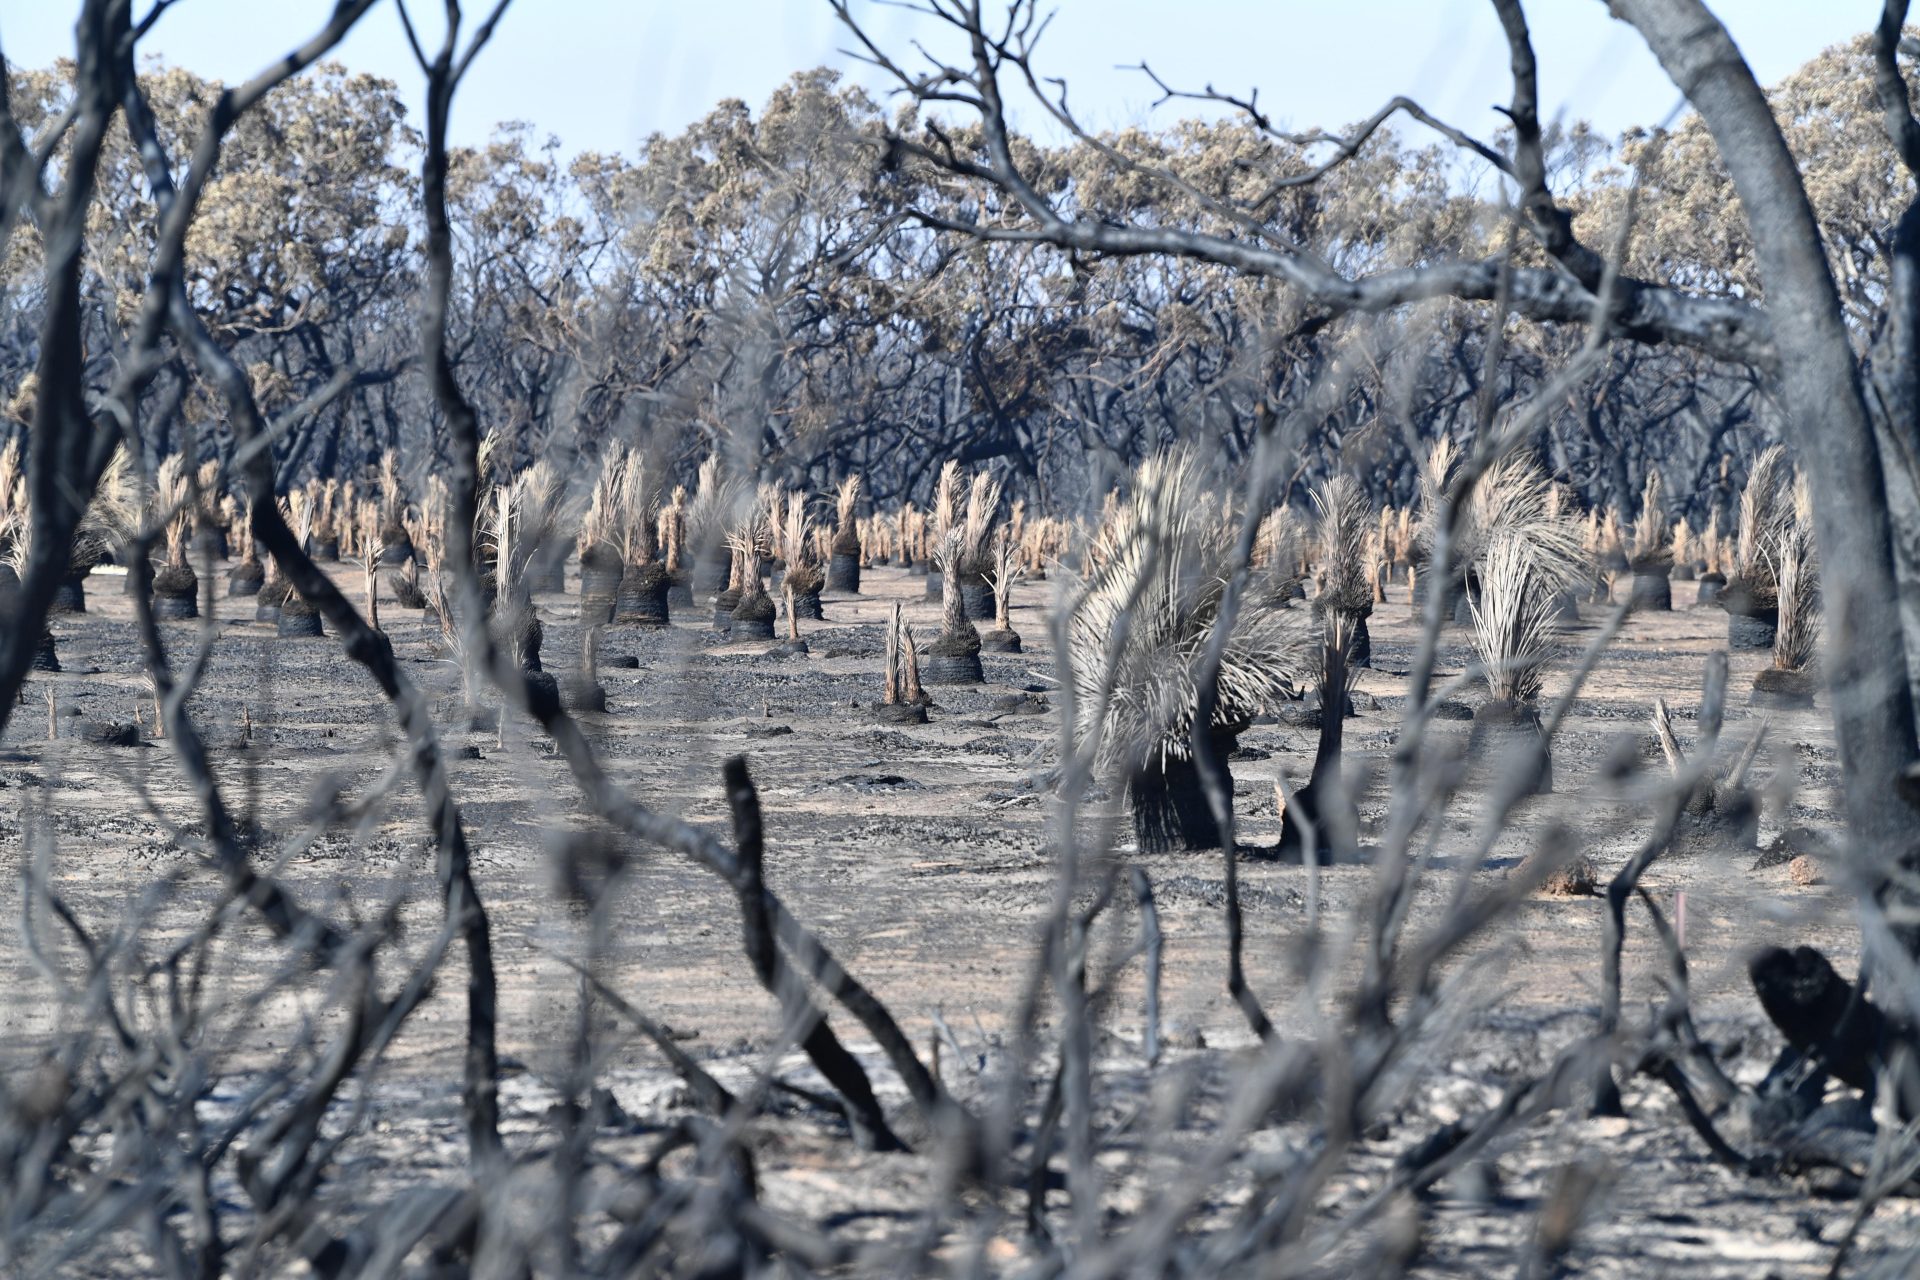 Army deployed to help with bushfire recovery effort in Australia